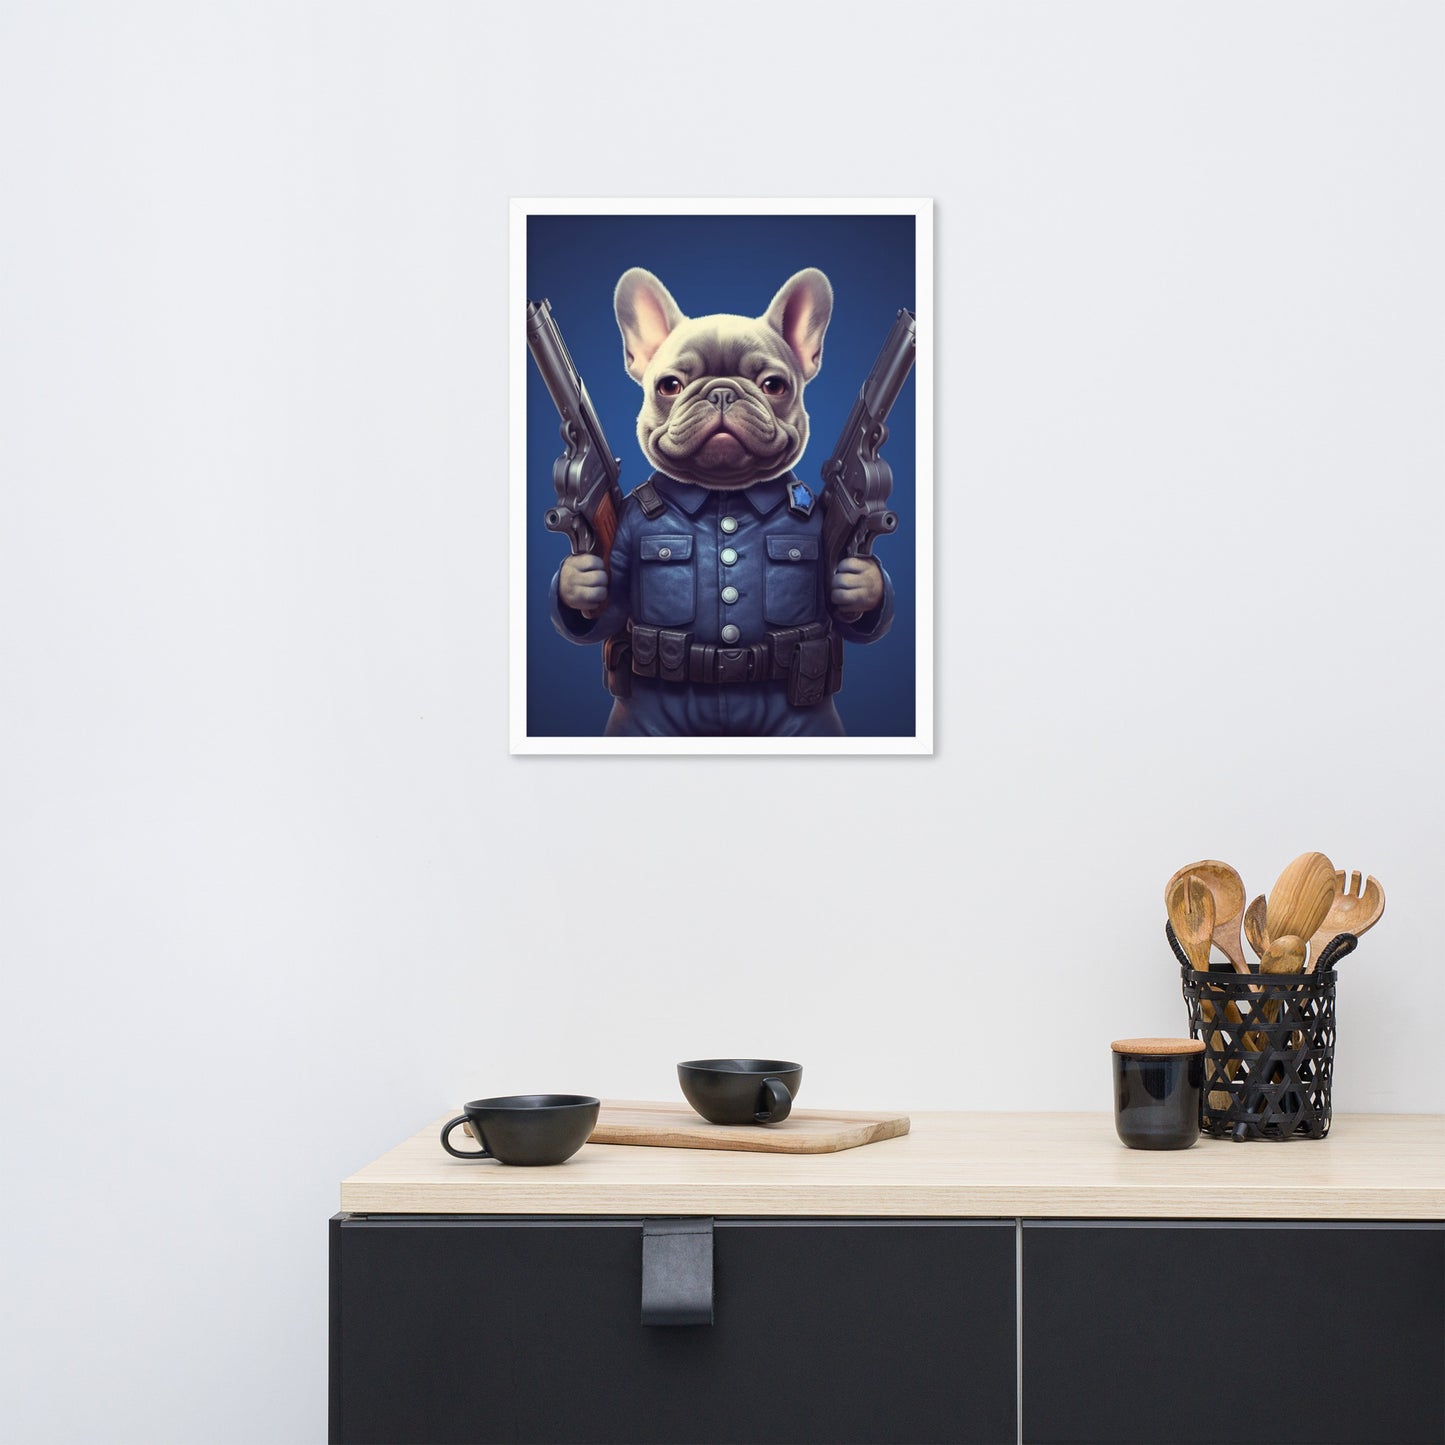 Policeman Frenchie Framed Poster - A Brave and Artistic Choice for Pet Lovers and Law Enforcement Admirers